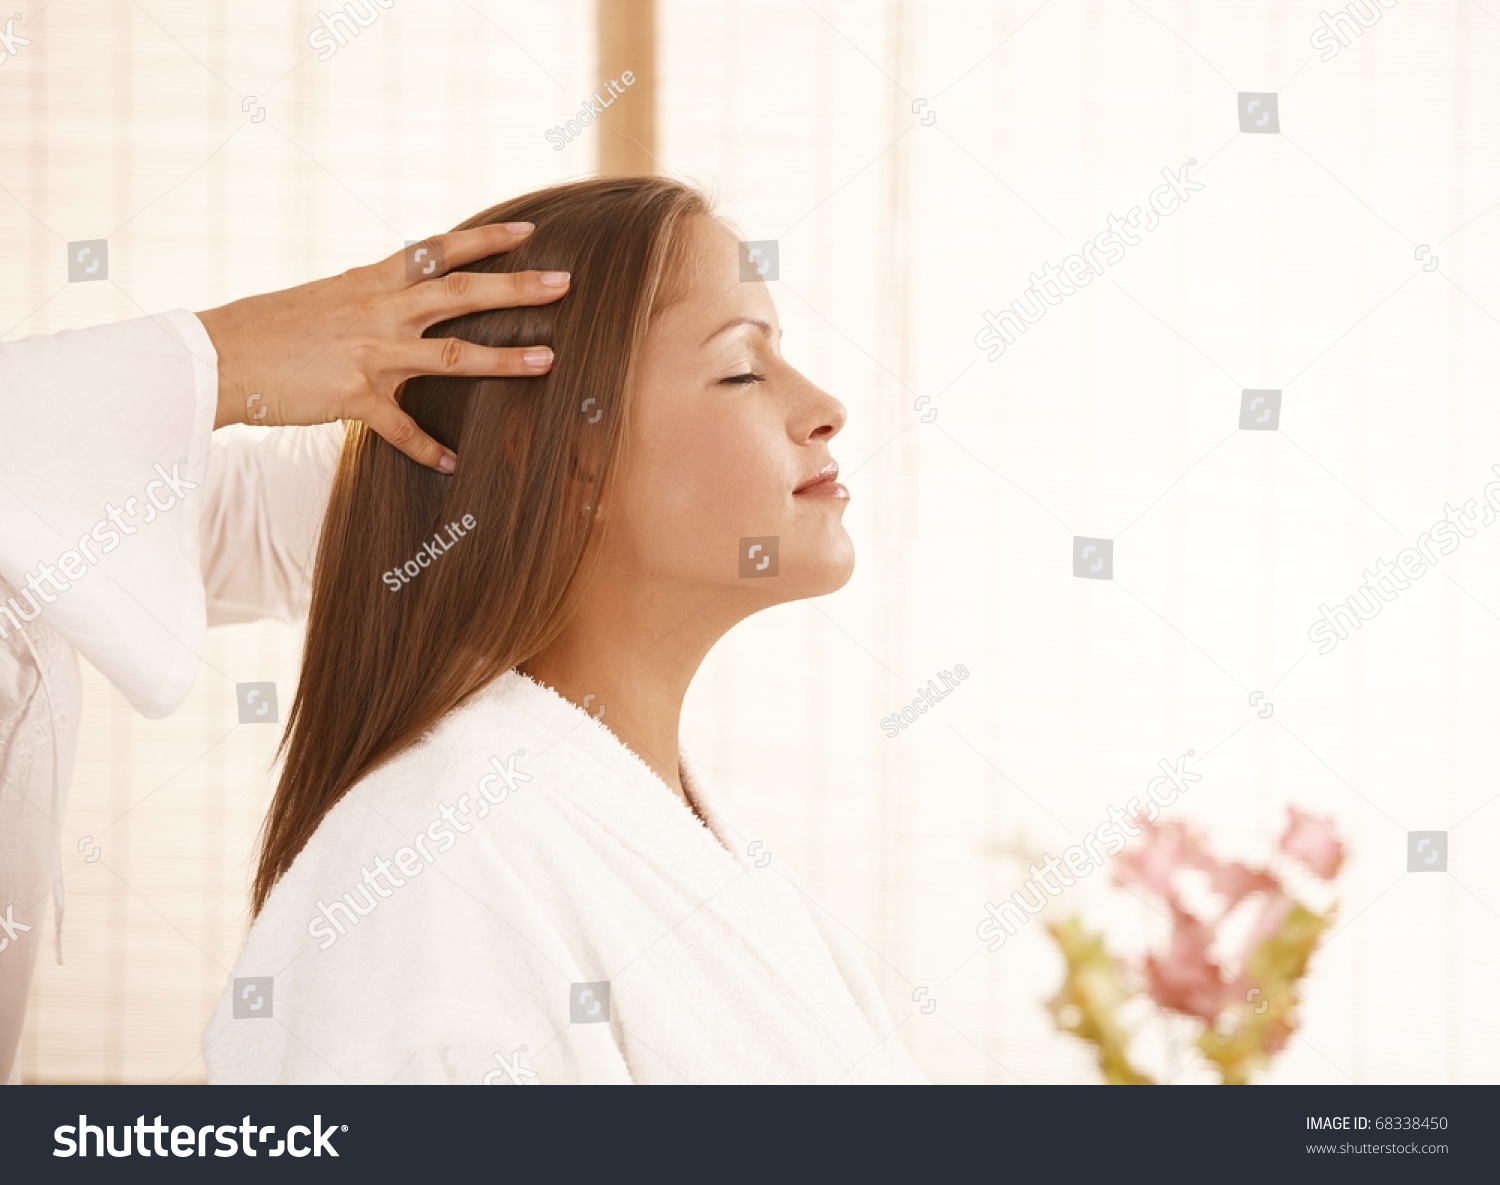 Portrait of young woman enjoying head massage with closed eyes, smiling. #68338450